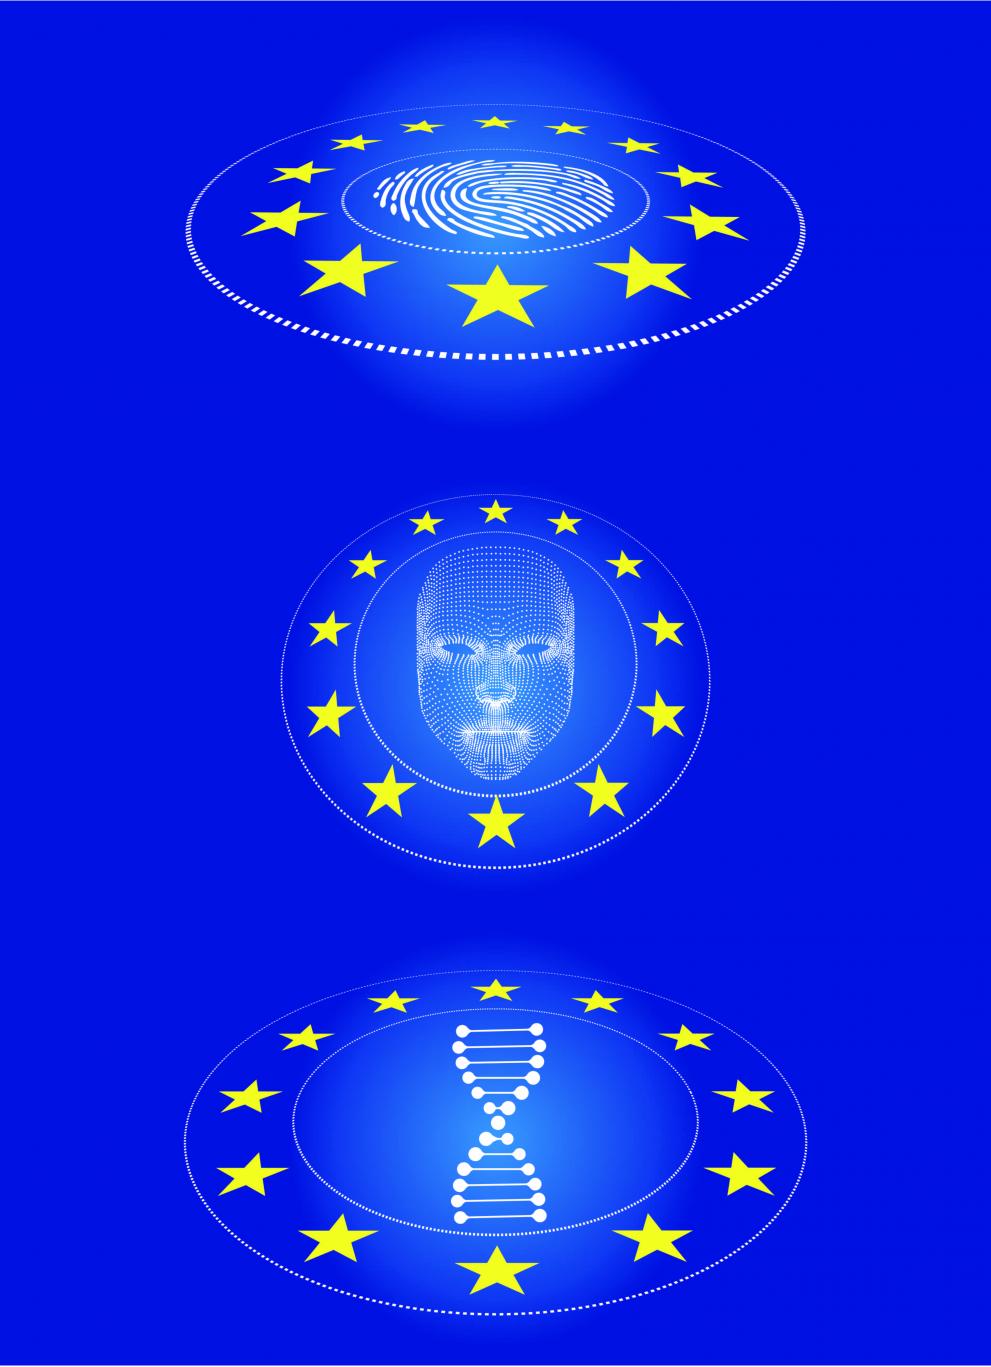 Three JRC technical reports reviewing new biometric modalities for their integration in the Schengen Information System